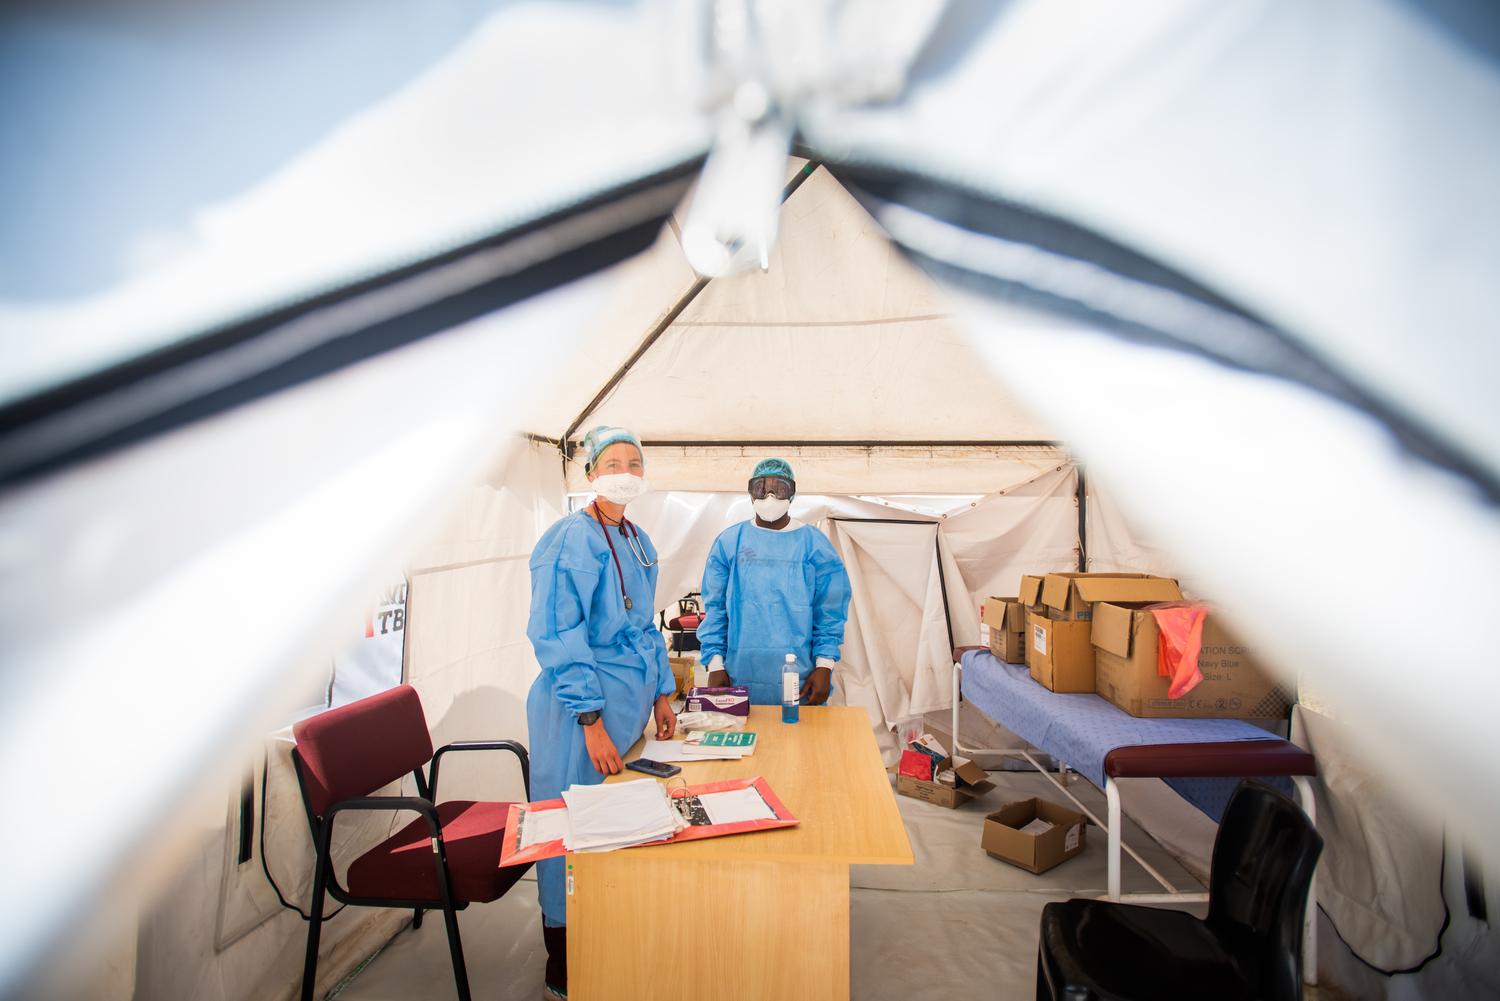 Dr Helene Muller and registered nurse Buhle Nkomonde work in the COVID-19 screening and testing tent at Mbongolwane district hospital. KwaZulu-Natal province, South Africa, August 2020. 